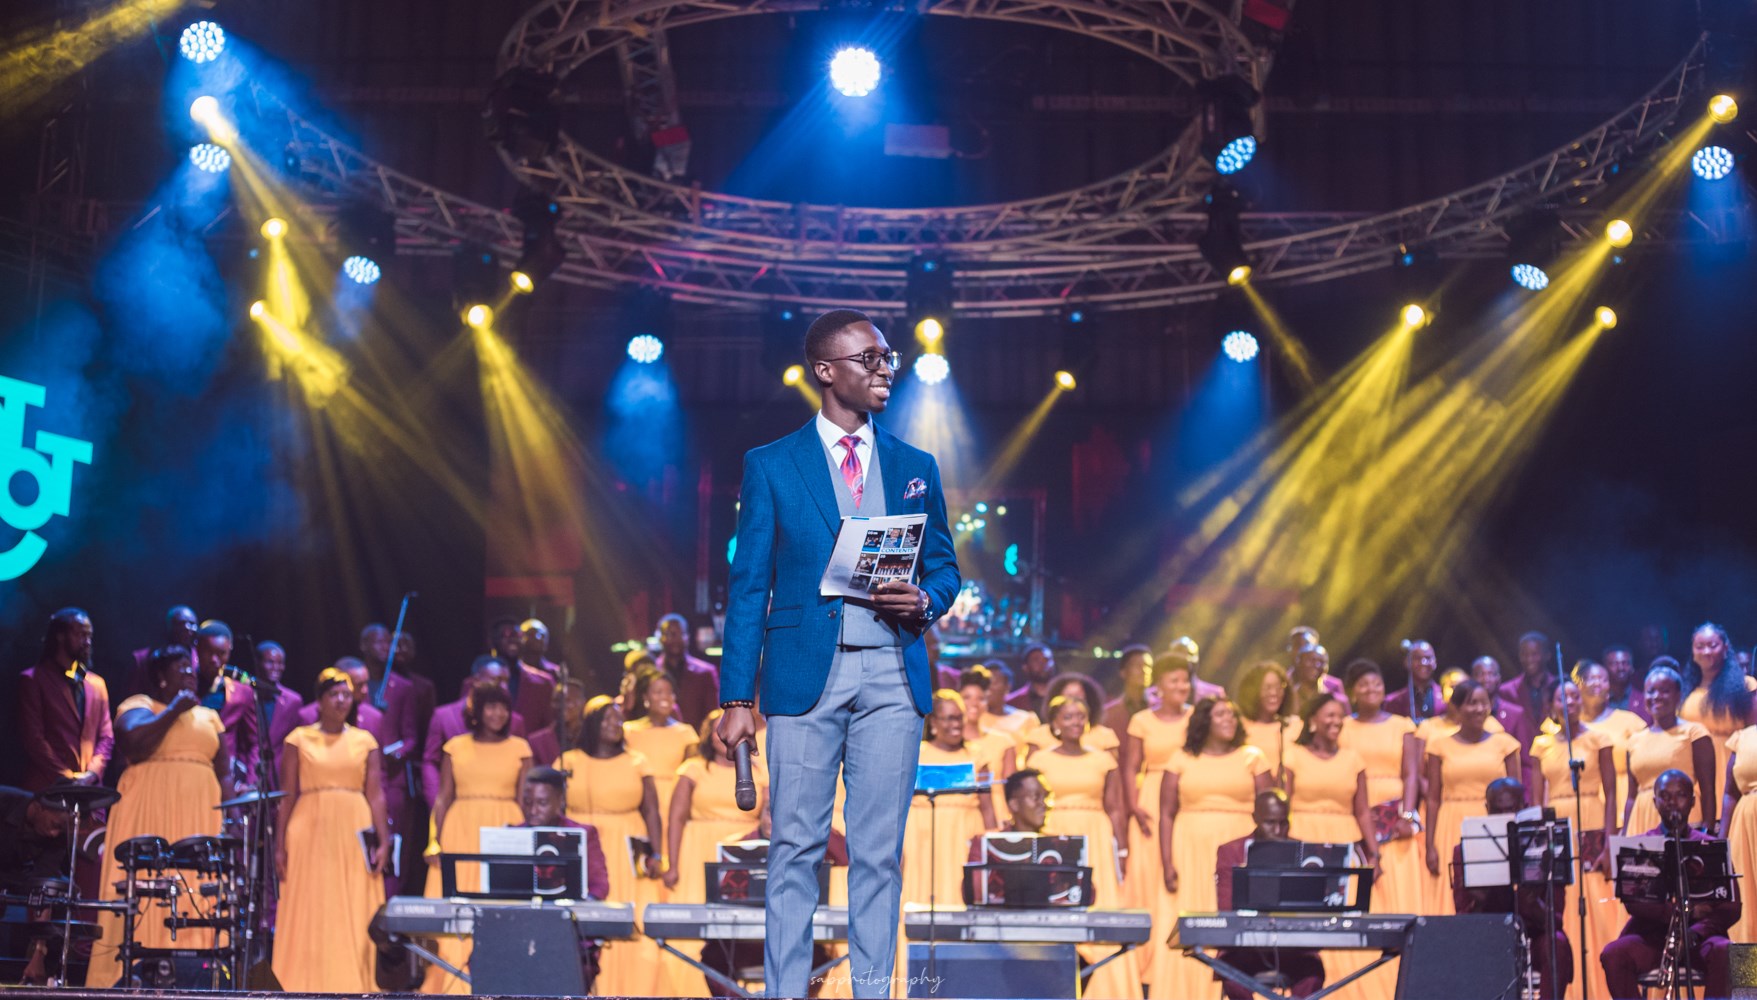 Our Talents, Our Thanksgiving Choral Music Ghana offers insight into the latest concert by Harmonious Chorale Ghana, which explored the range of talents available to the most celebrated choir in Ghana today.